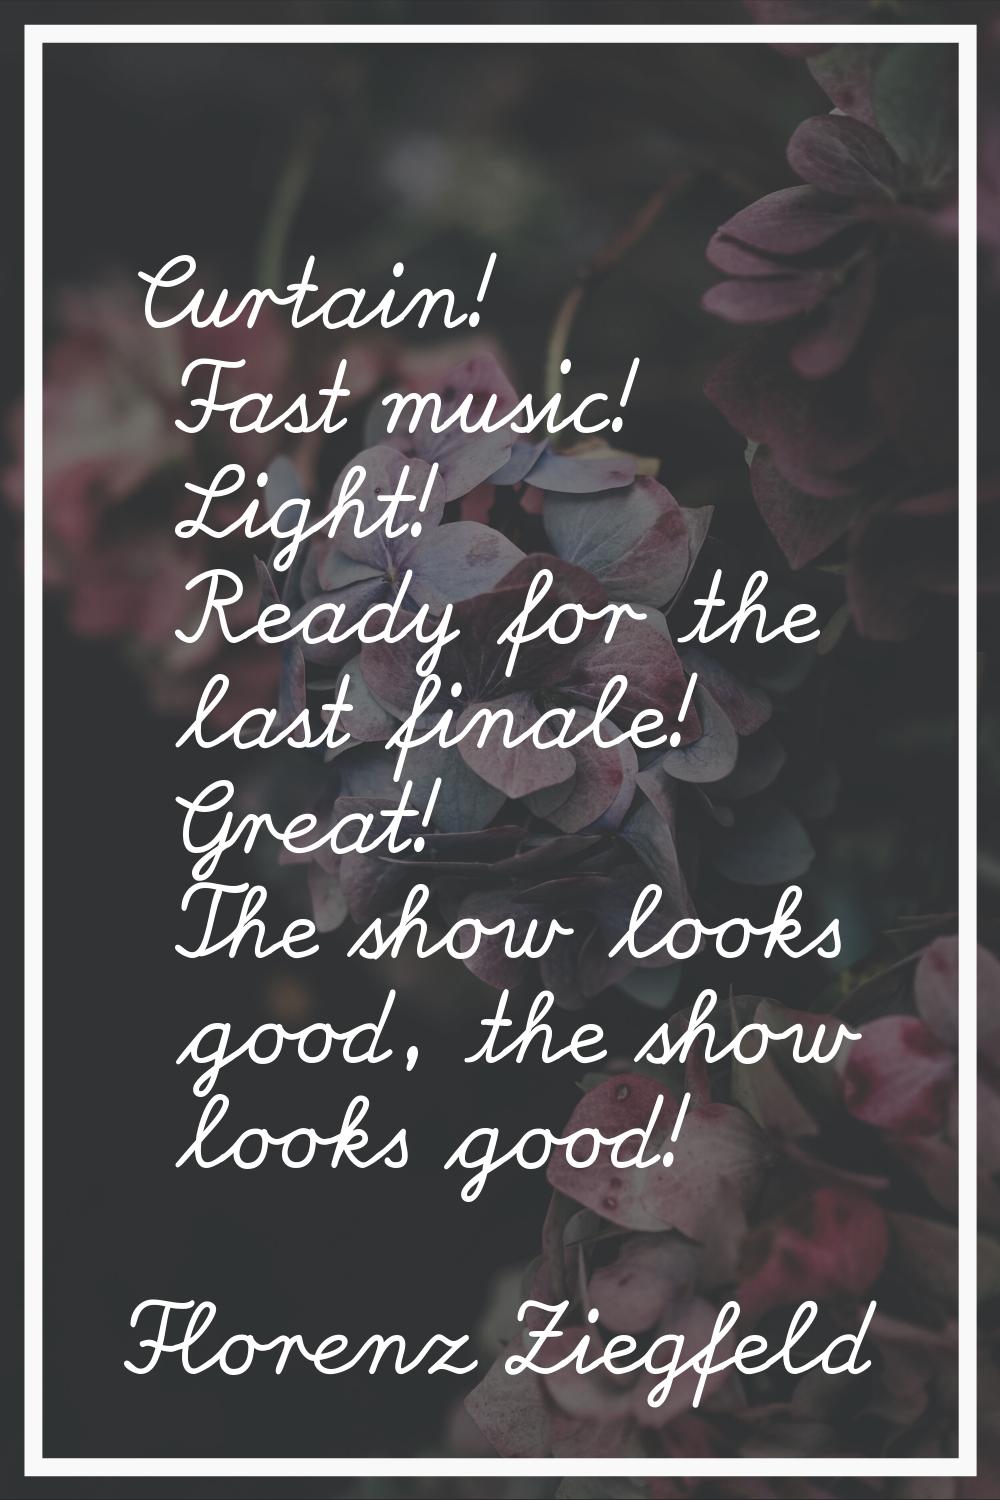 Curtain! Fast music! Light! Ready for the last finale! Great! The show looks good, the show looks g